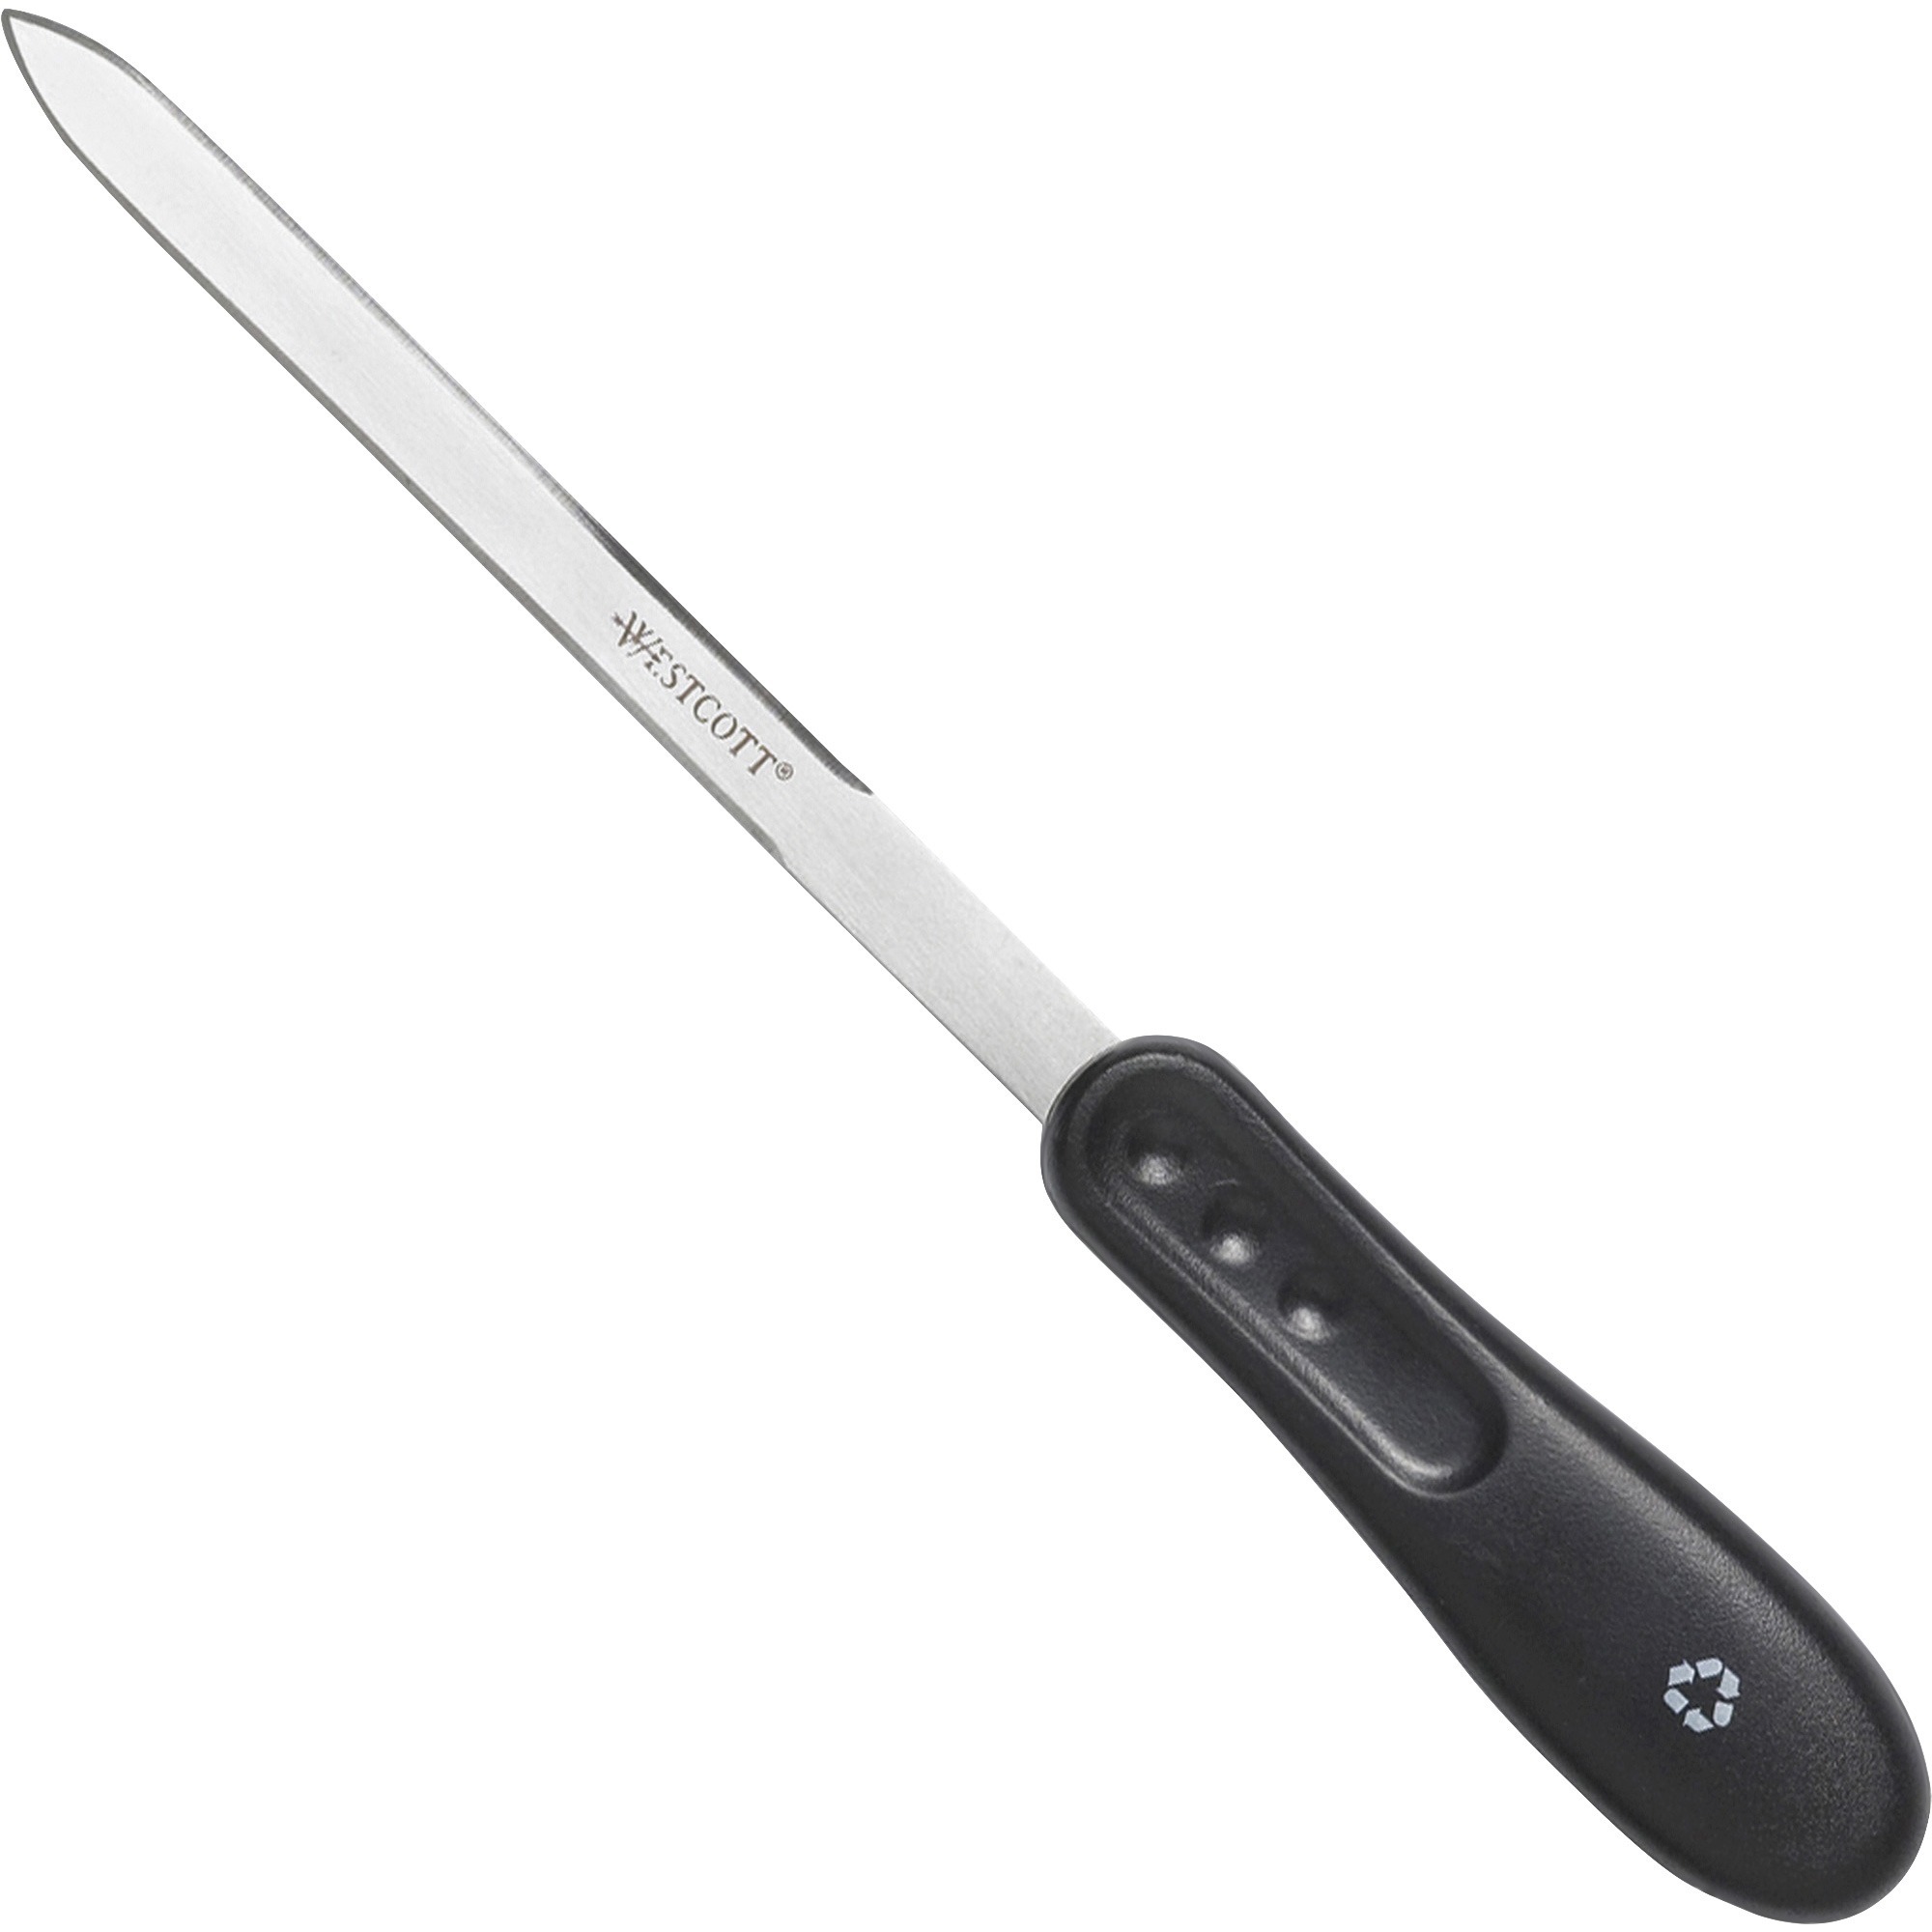 Acme United Kleen-Earth Antimicrobial Letter Opener - Each